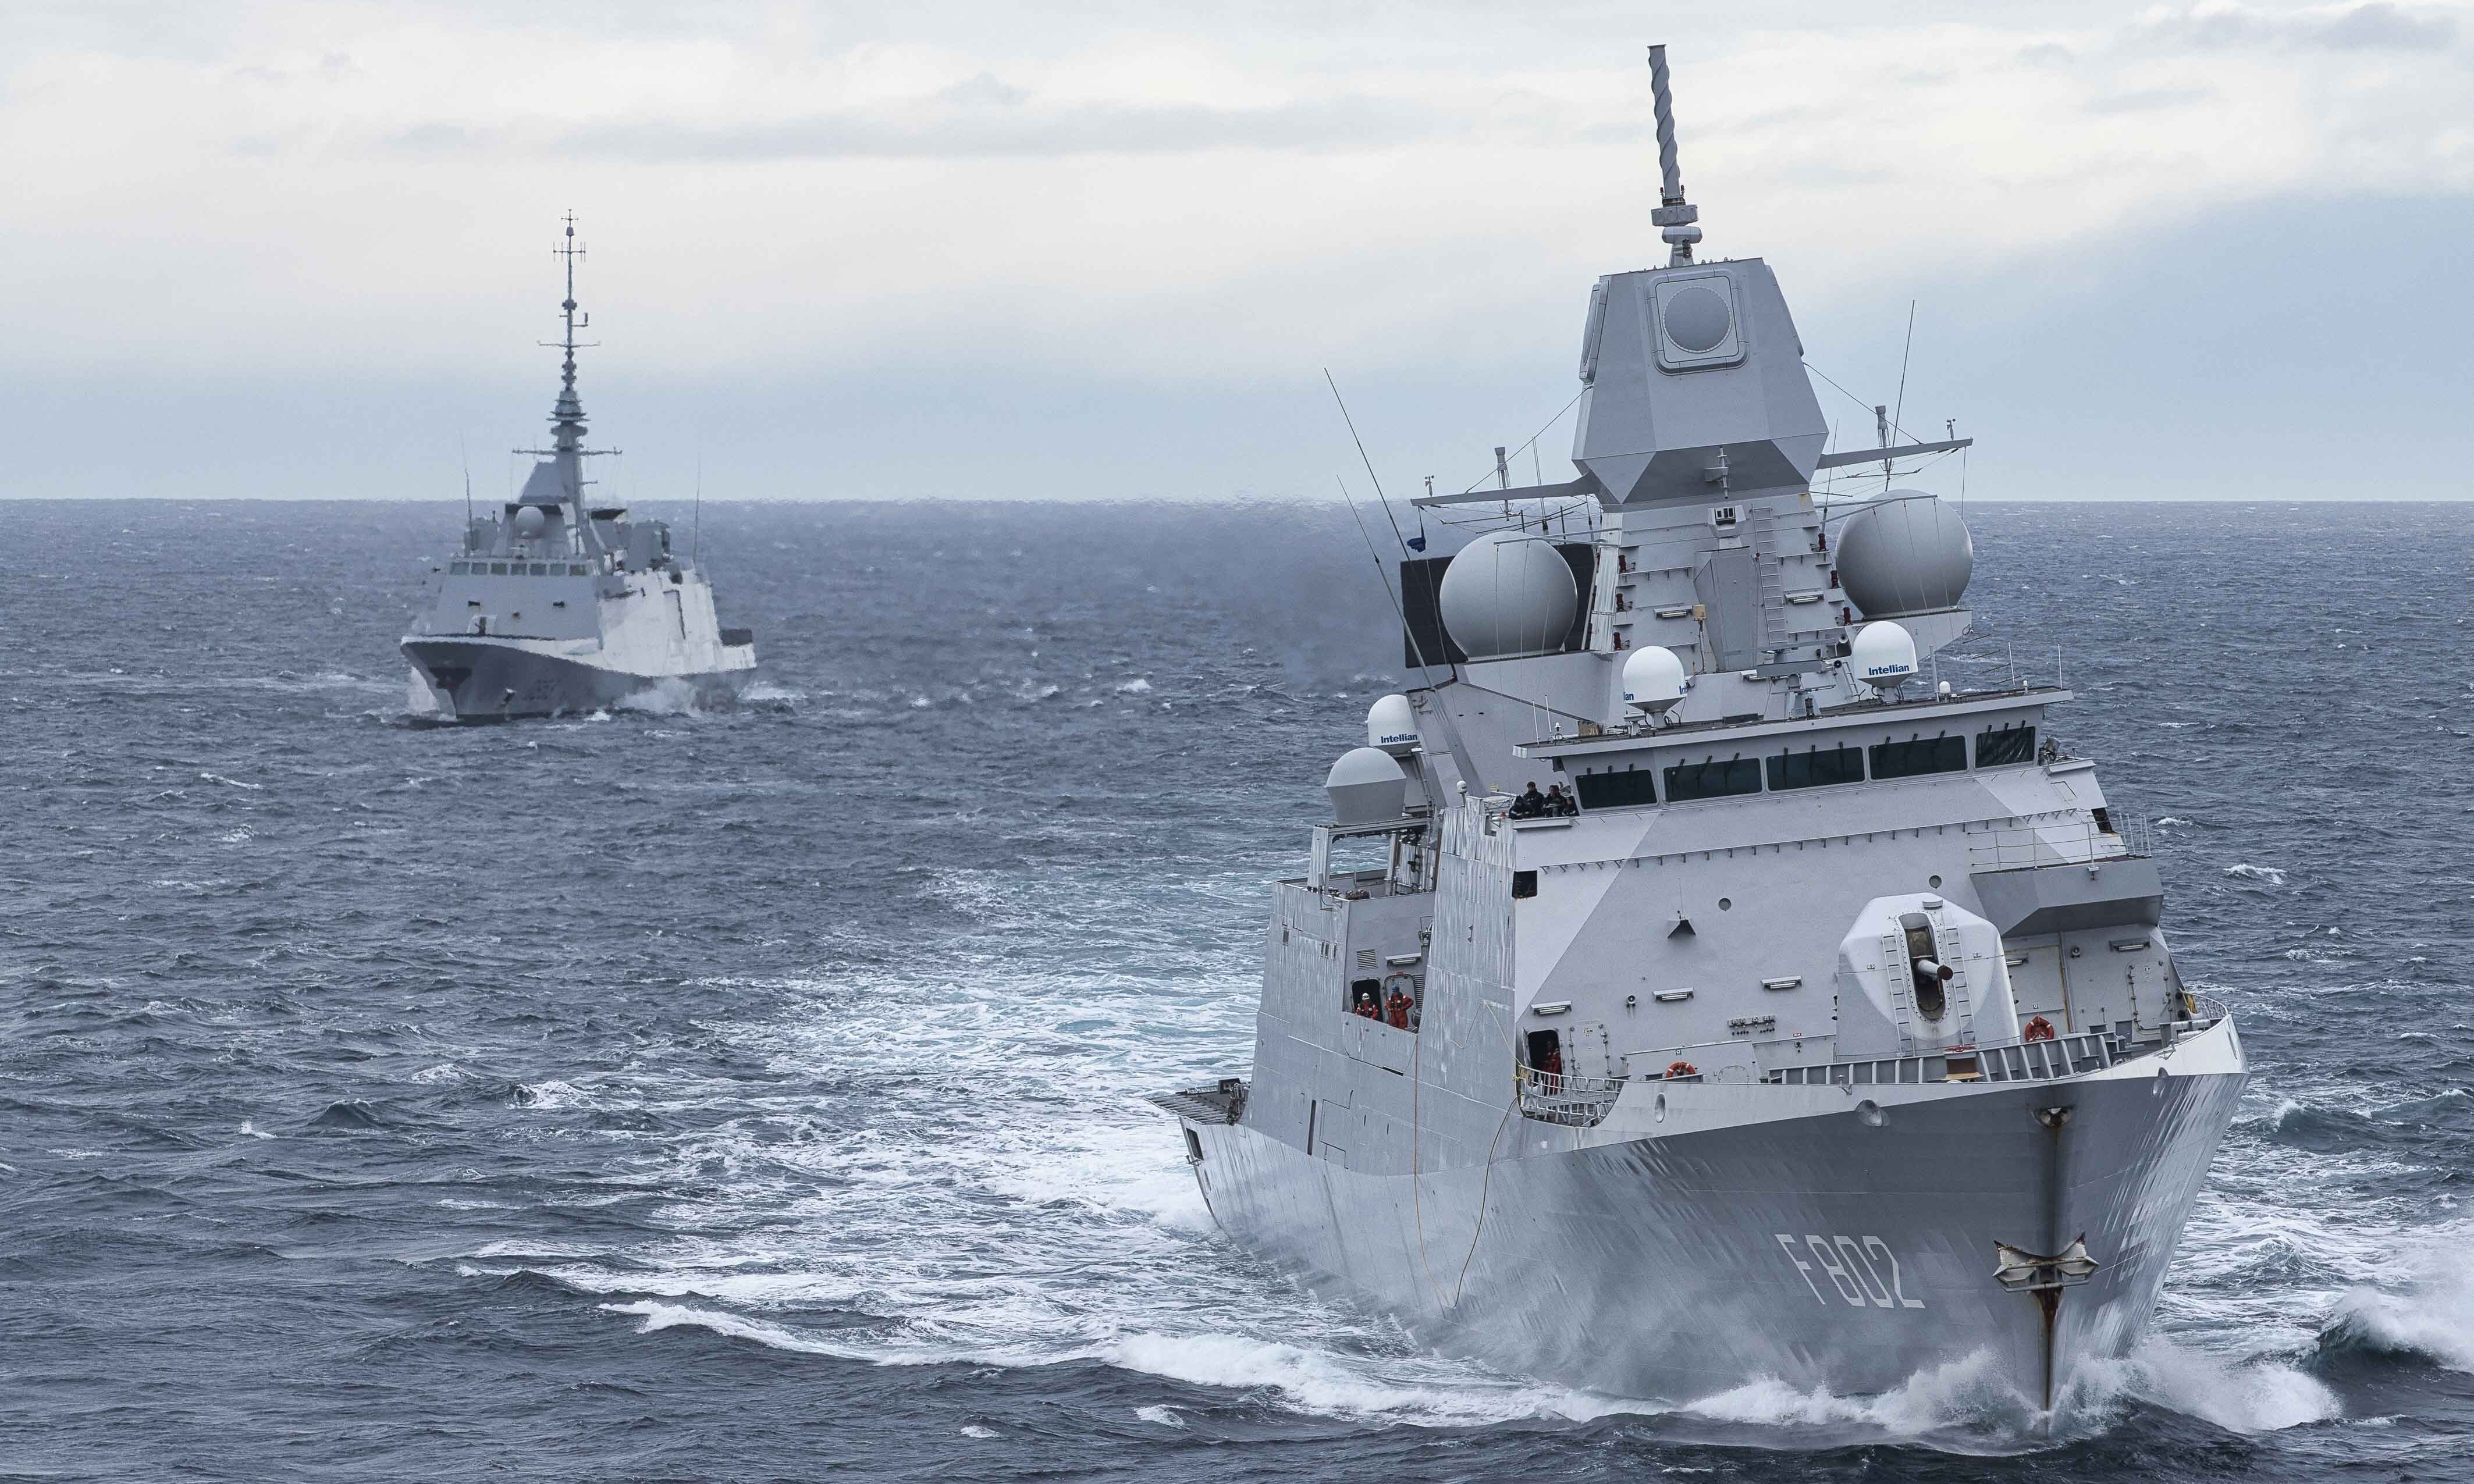 NATO ships scheduled to conduct training in the Baltic Sea